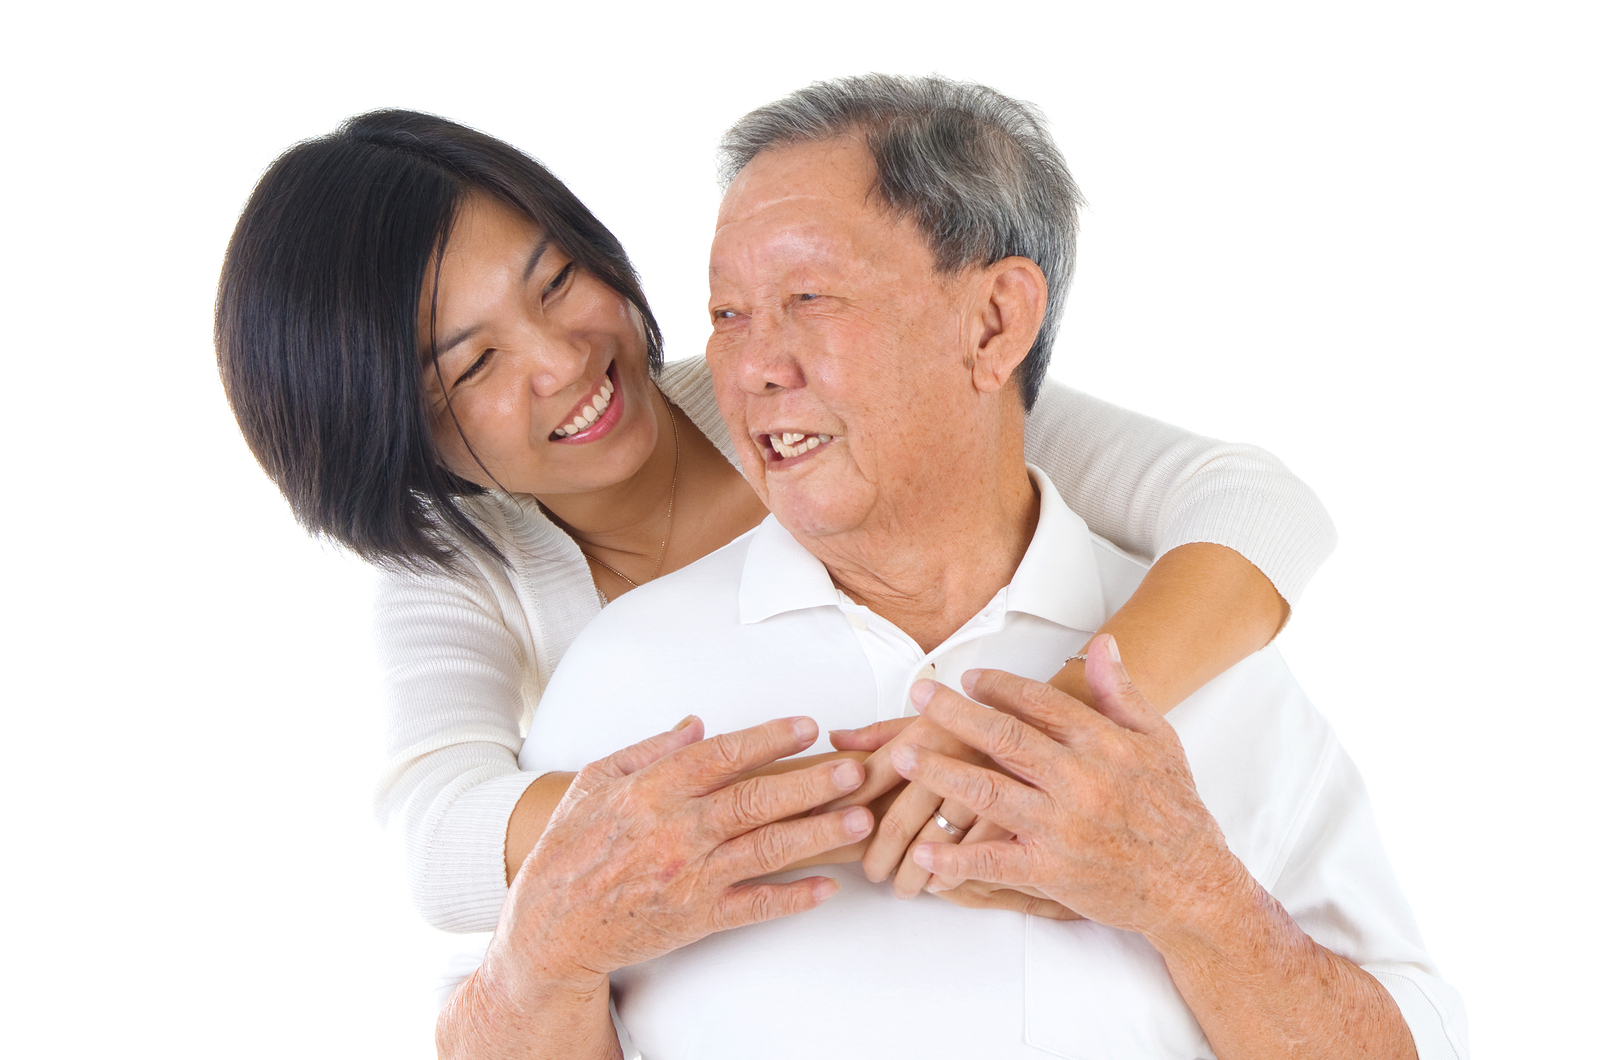 Homecare - Boundaries Are Important When You're Offering Help to Your Parents